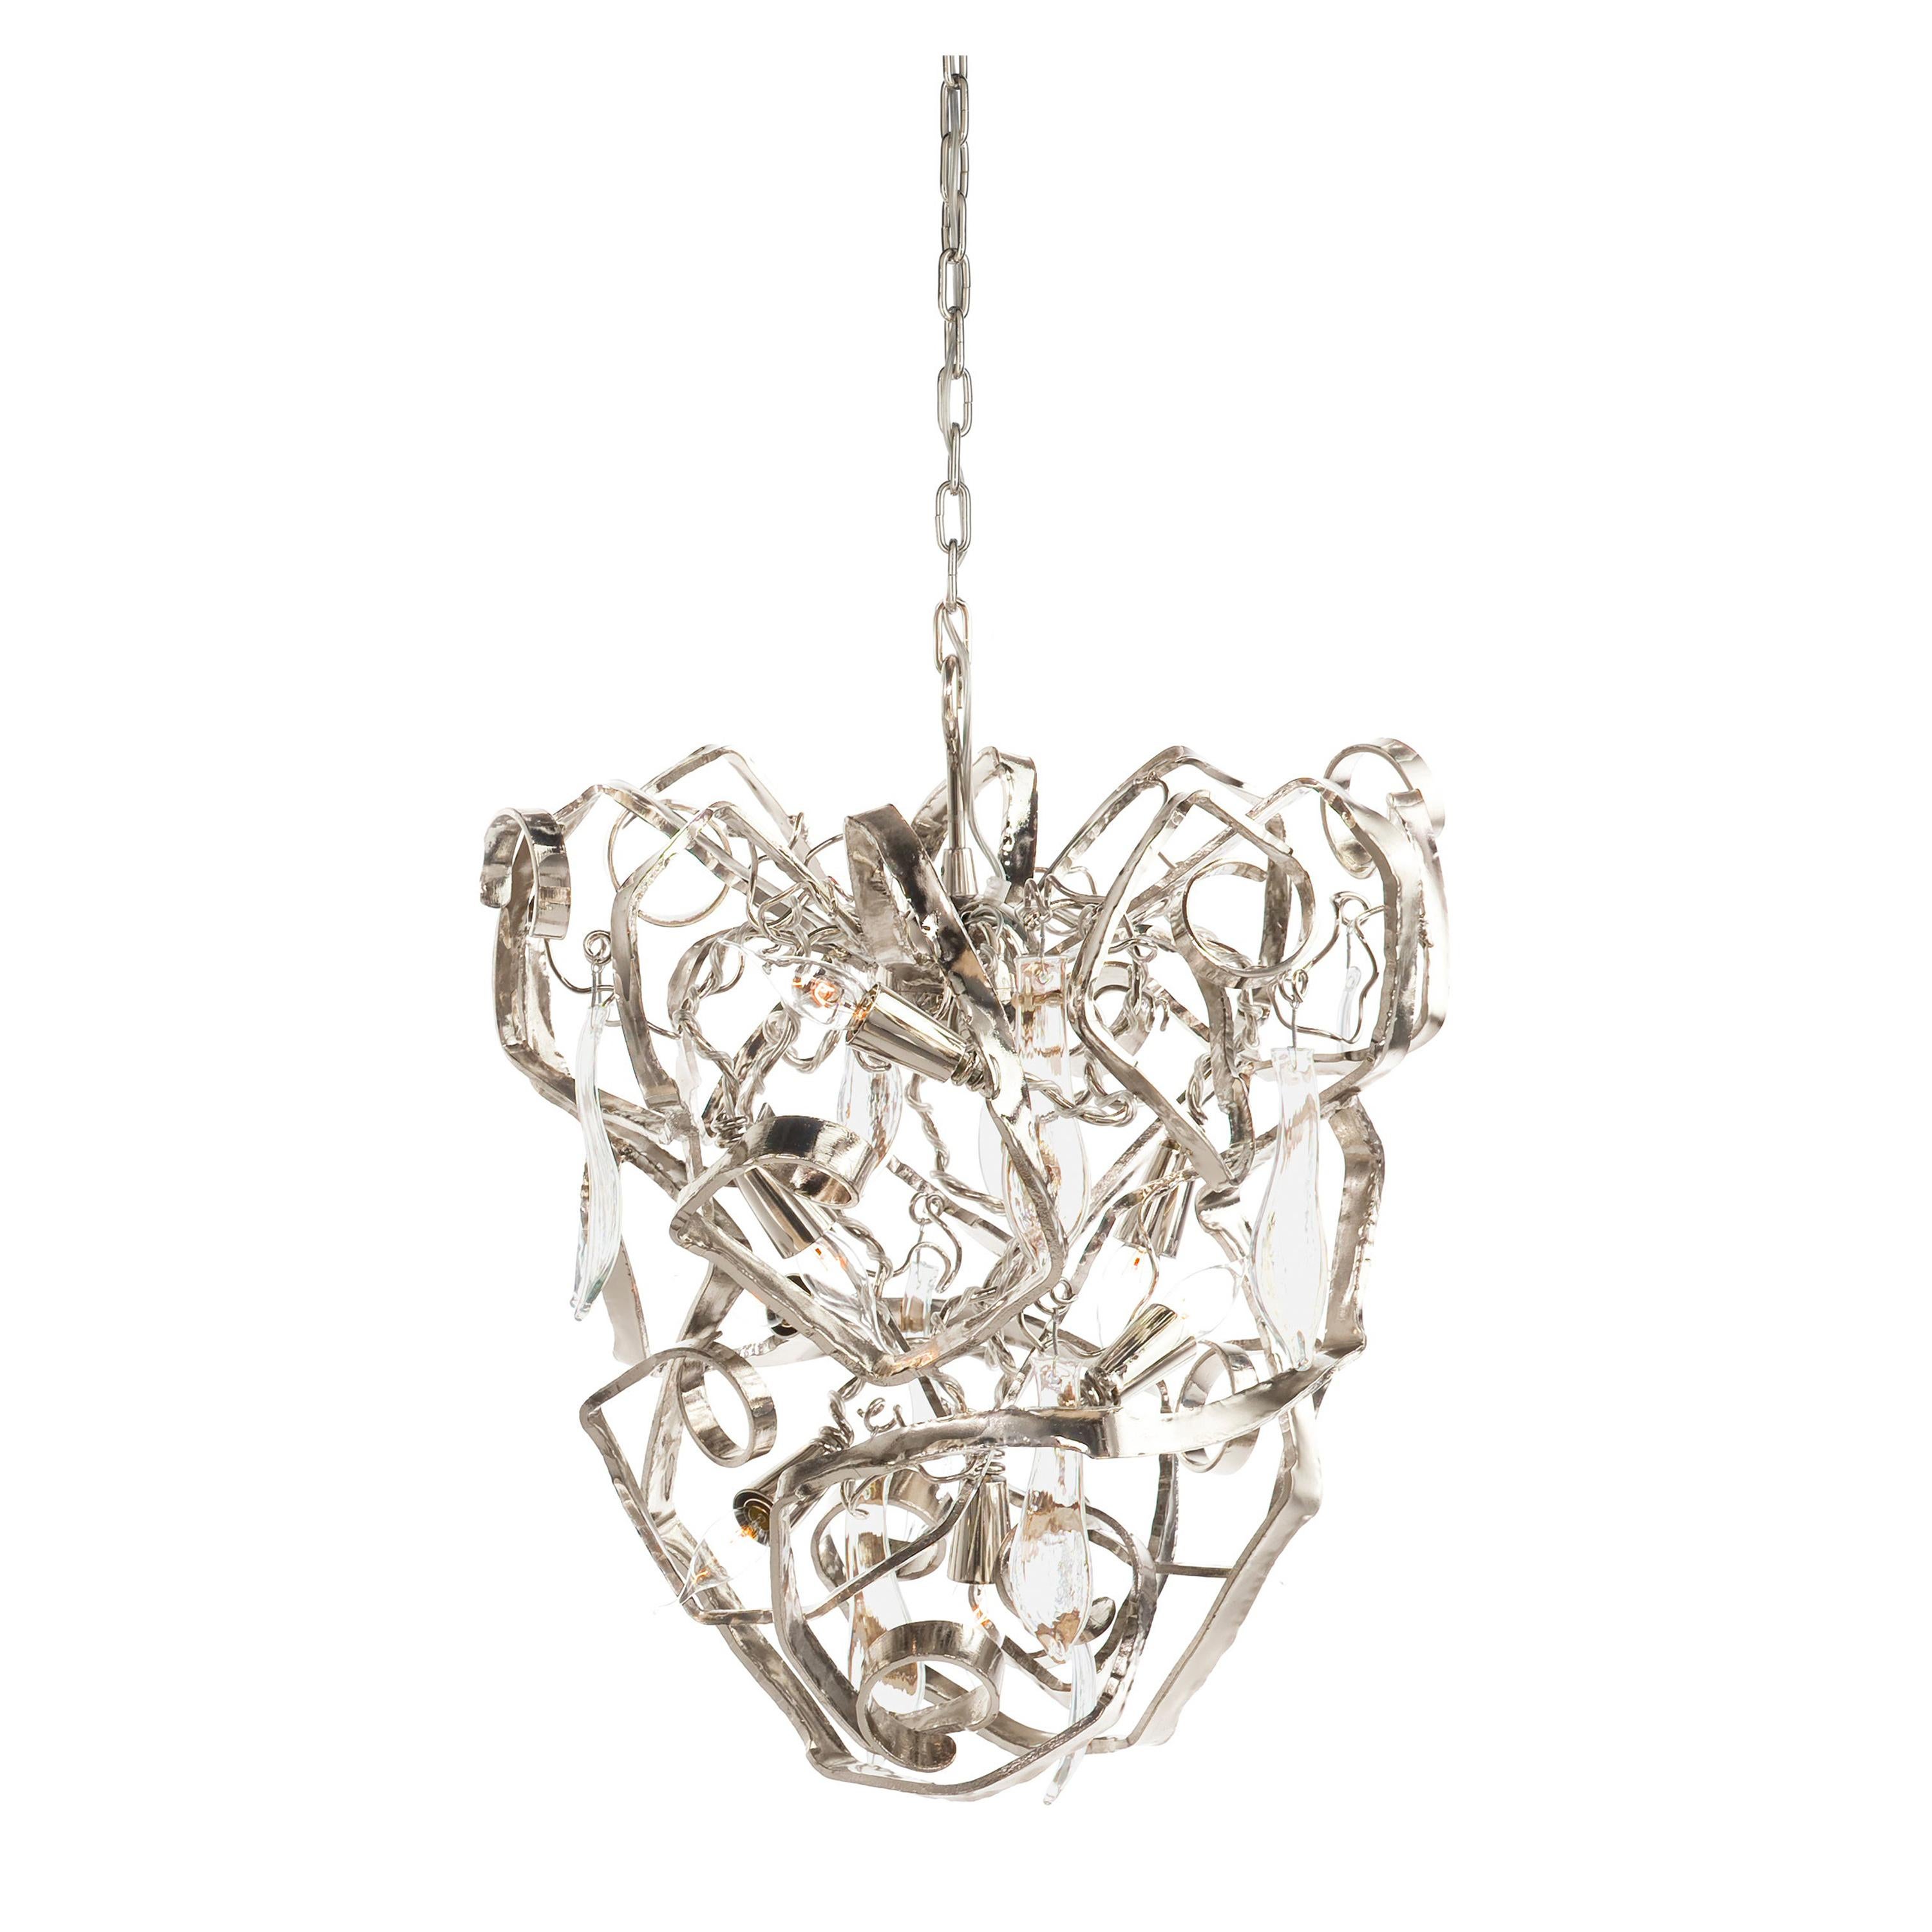 Modern Chandelier in a Conical Shape and in a Nickel Finish, Delphinium